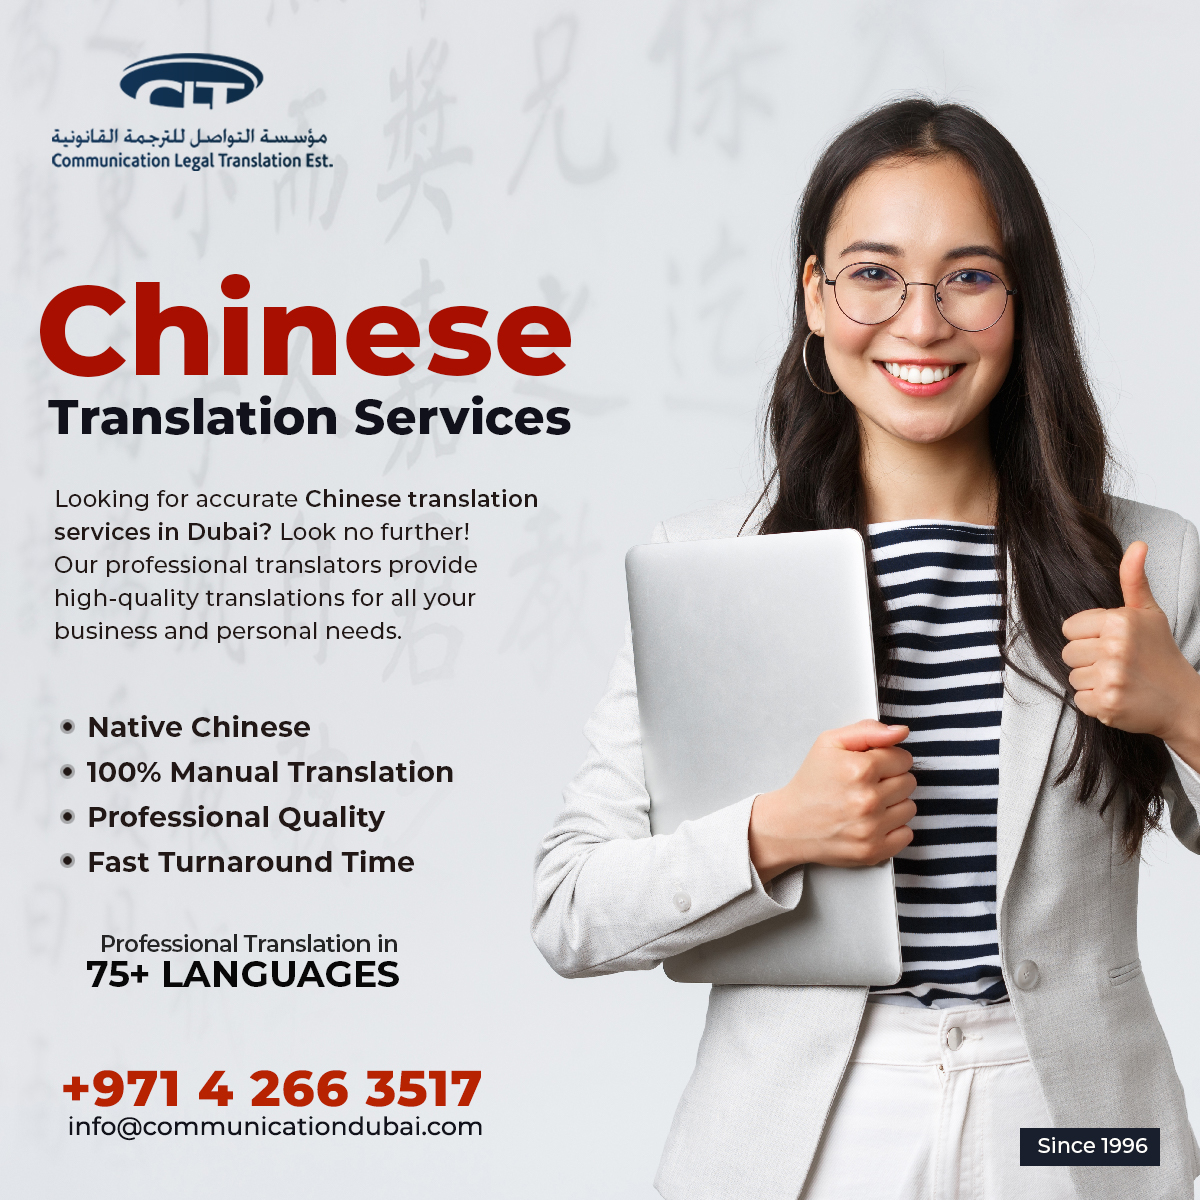 For More Information Please Visit Our Website
bit.ly/2ZDCeOD
Call / WhatsApp: +971 502885313

#ChineseTranslation
#中文翻译 
#ChineseTranslator
#汉语翻译服务